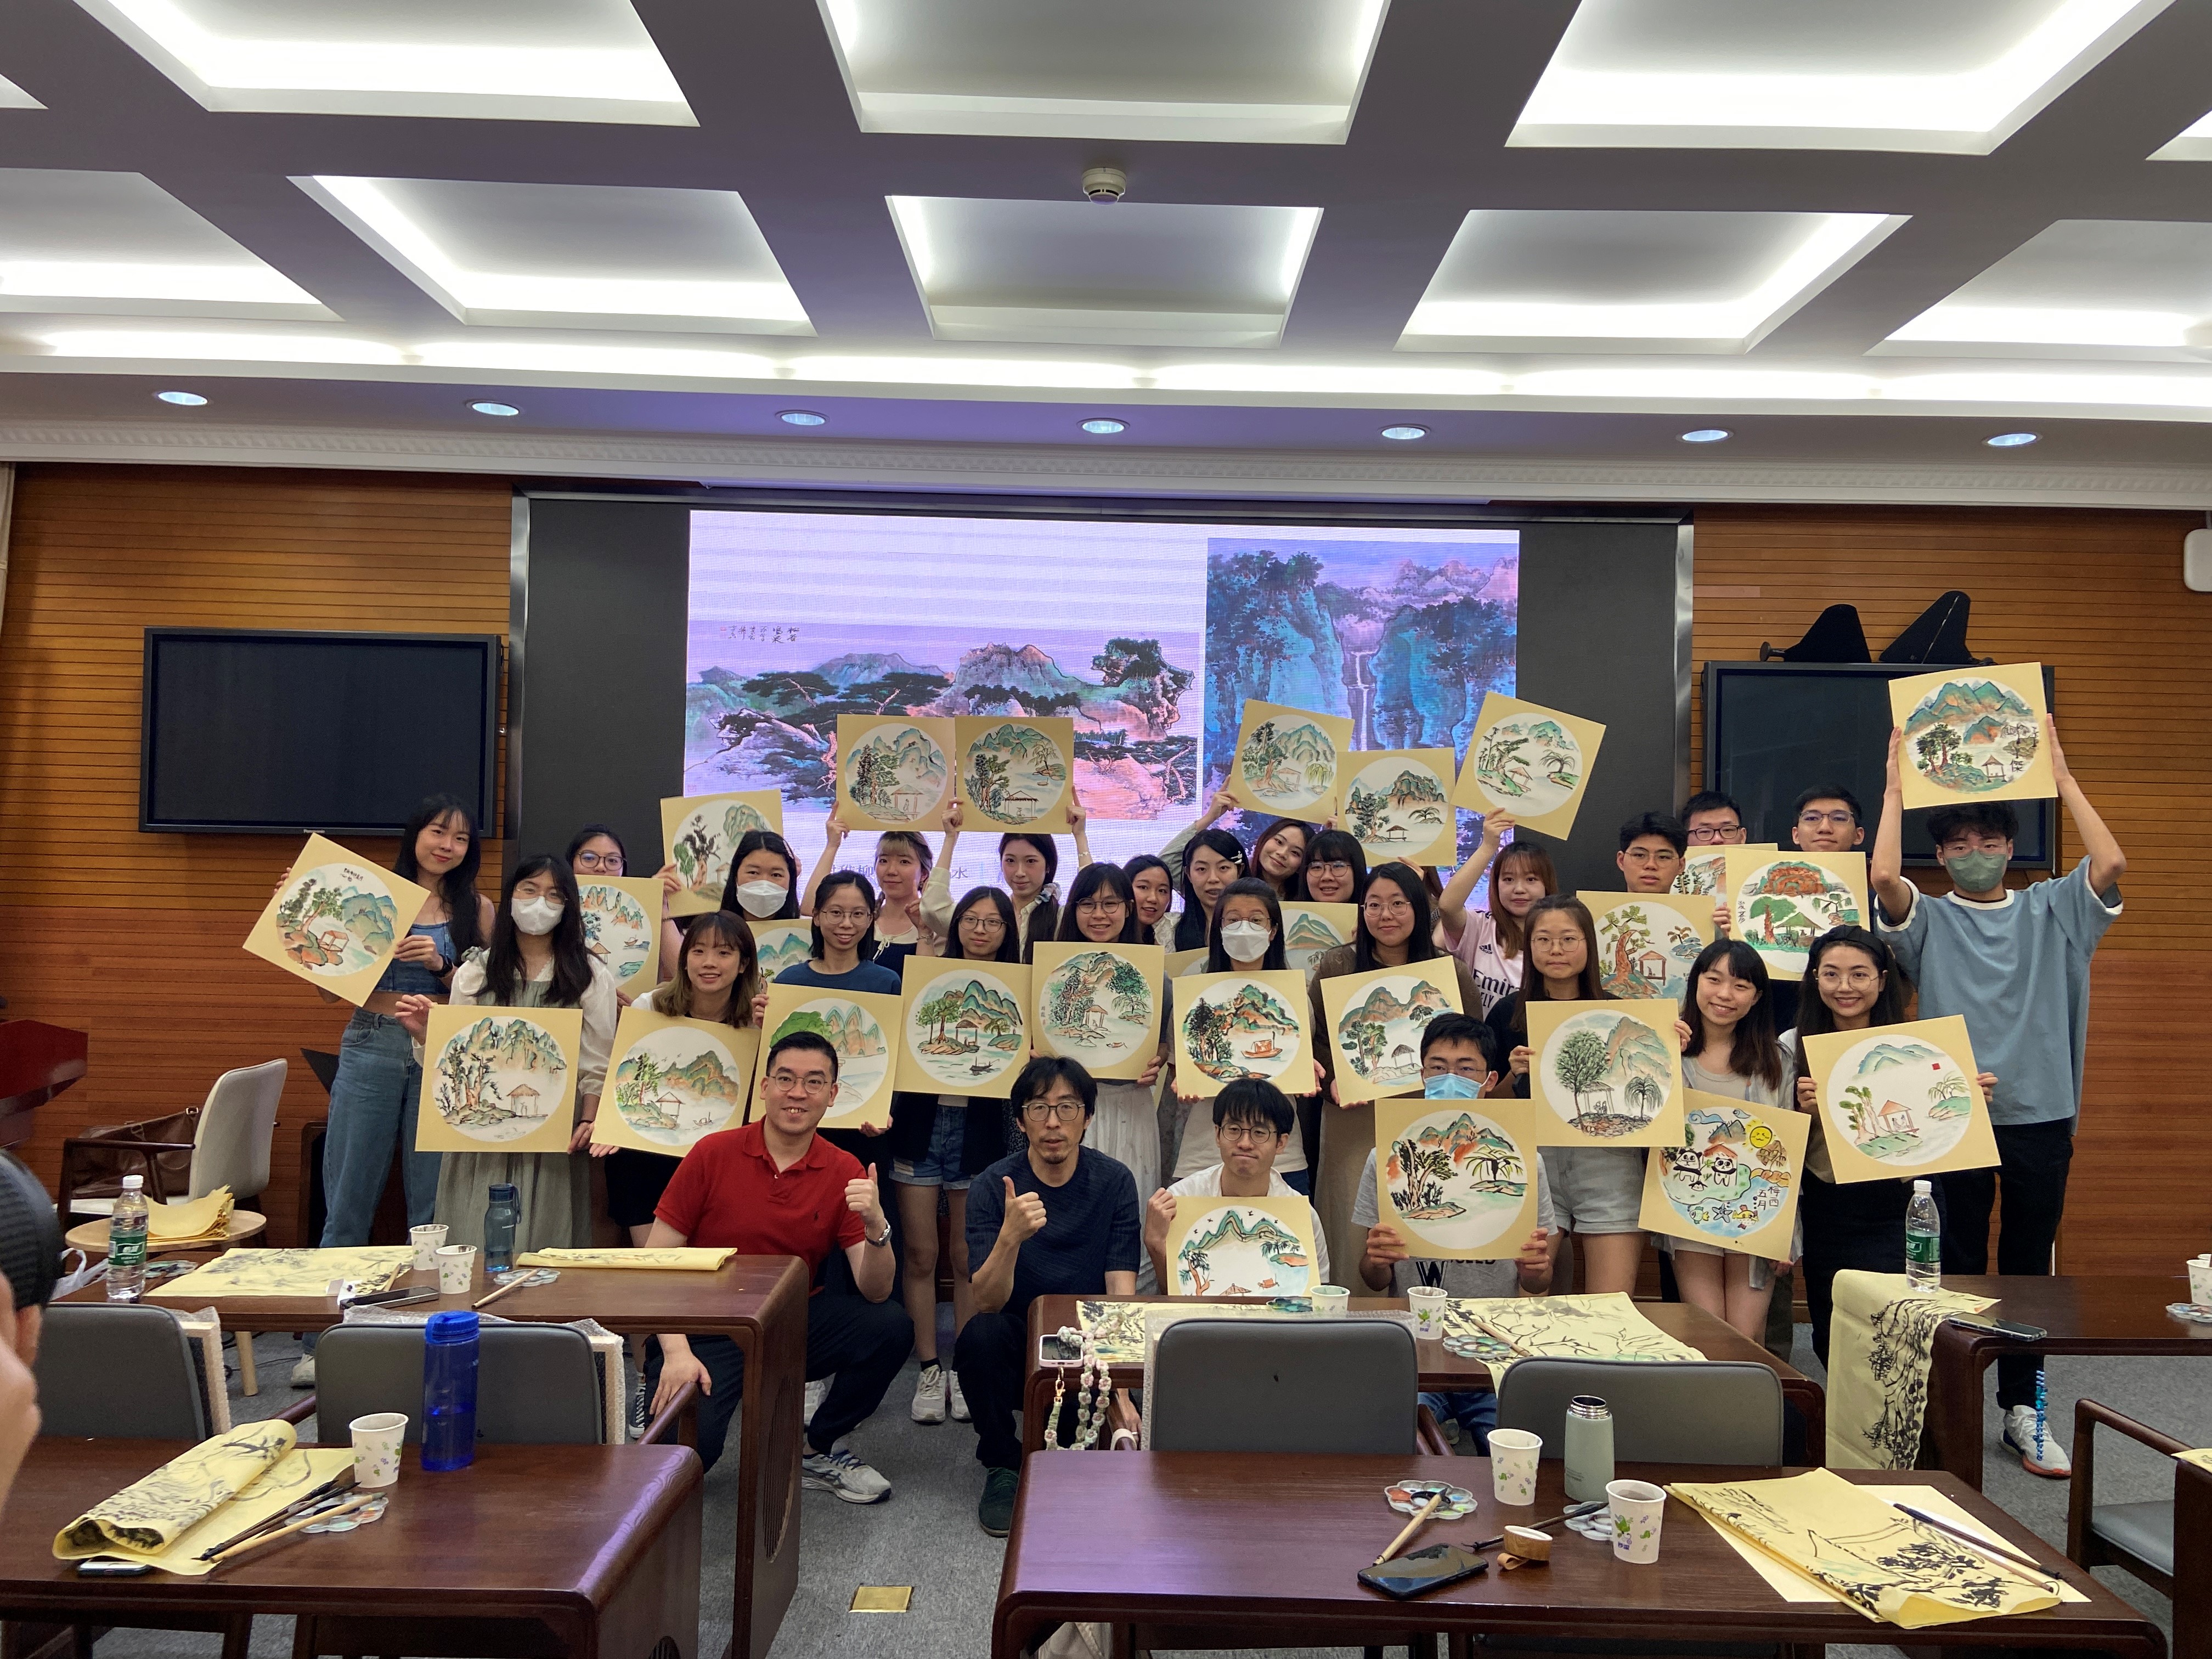 In the cultural exploration class of Blue-and-Green Landscape painting, students learned techniques of traditional Chinese landscape painting and finished the paintings under the guidance of Beijing Artist Yu Jidong.